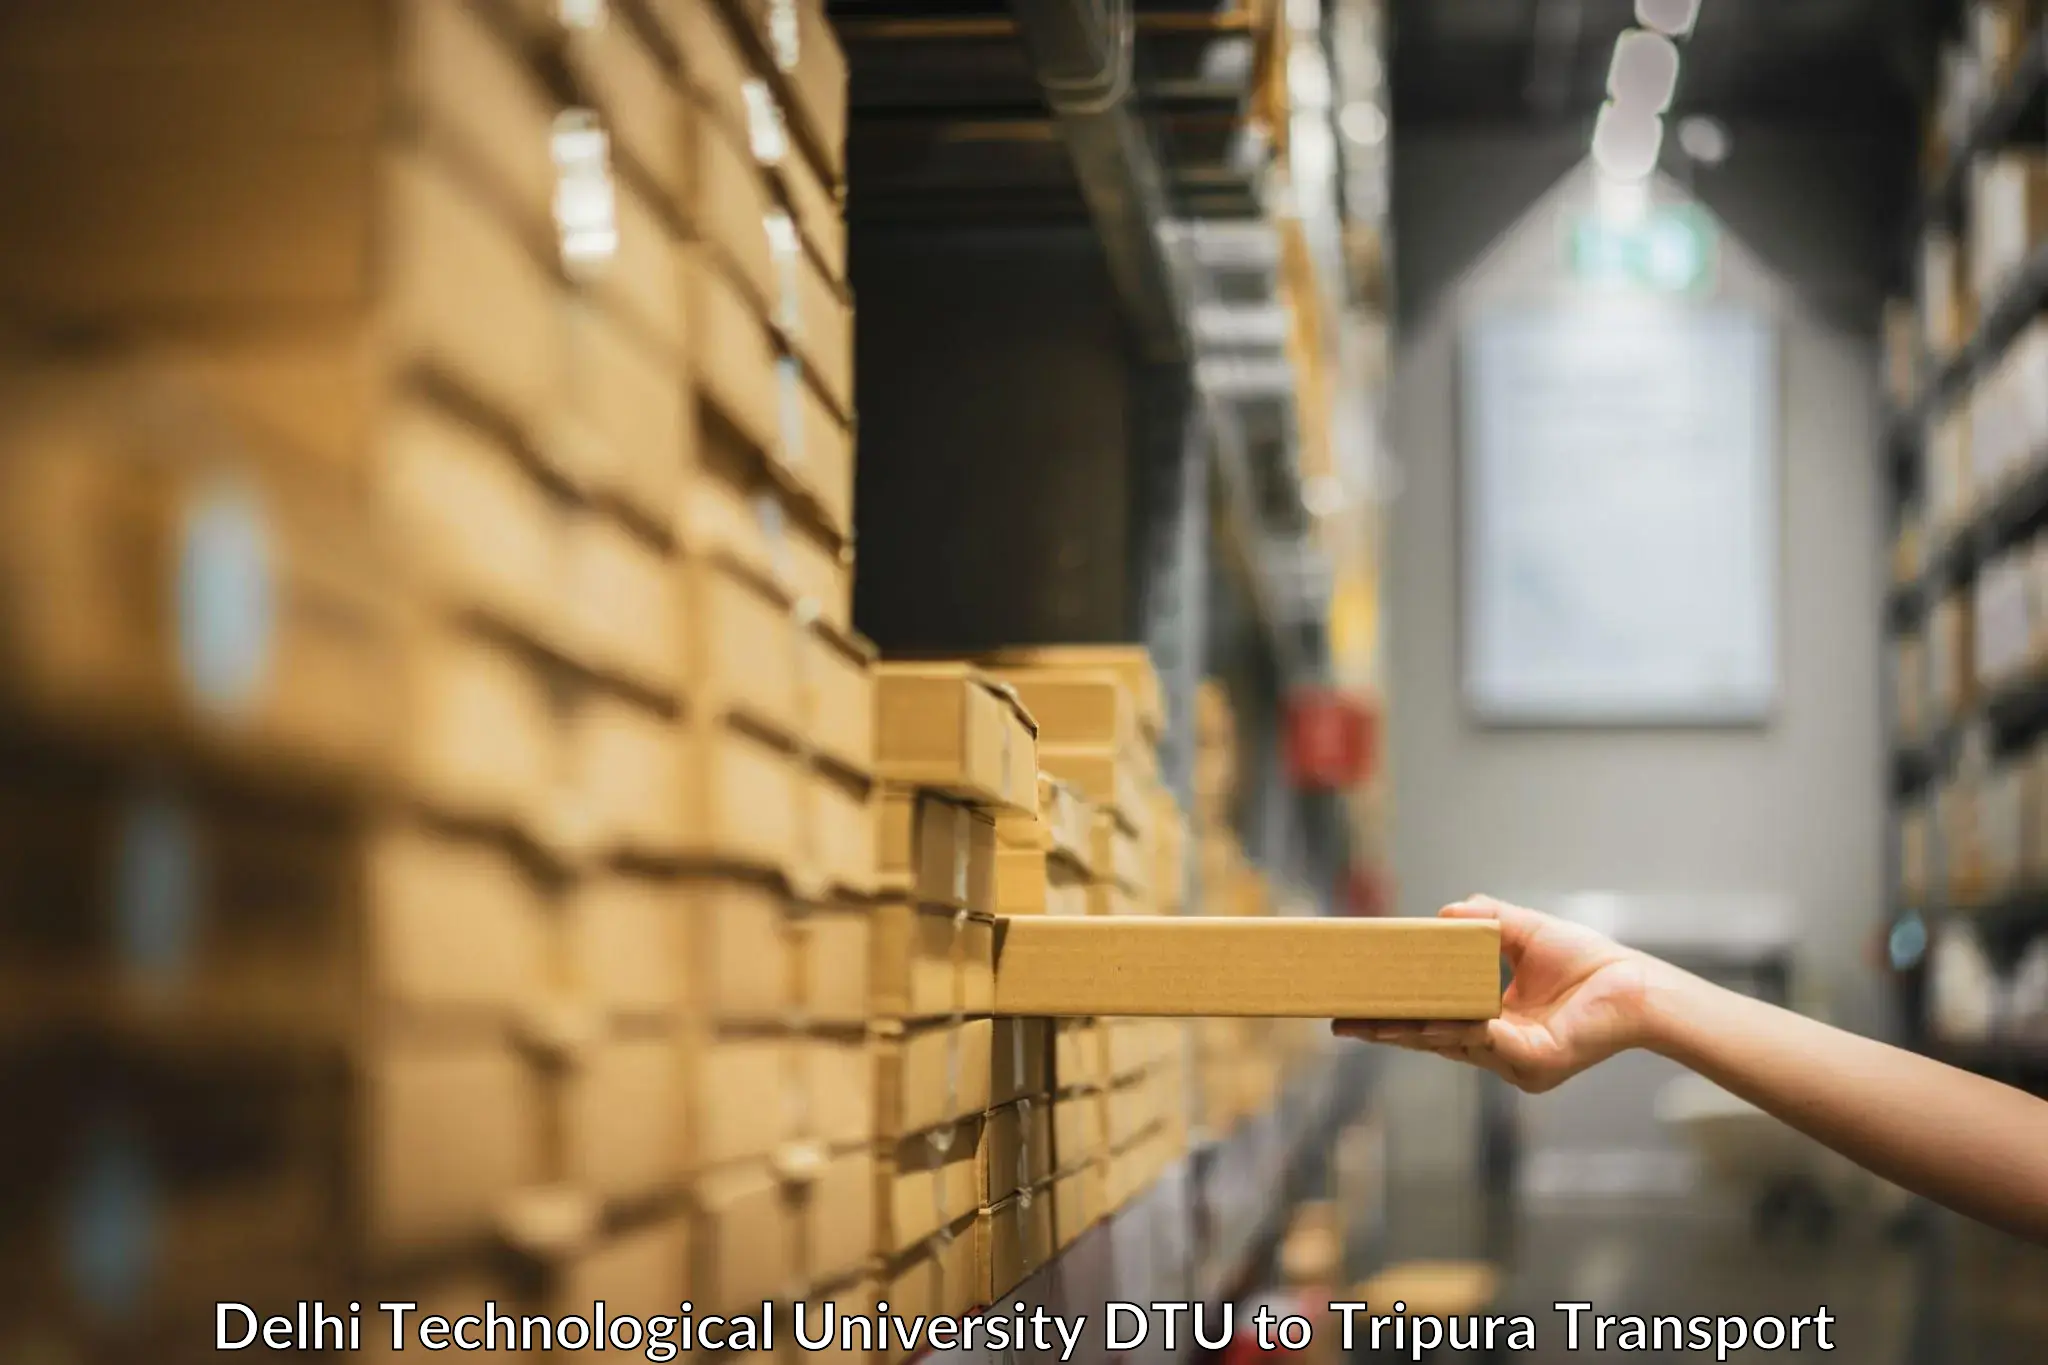 Road transport services in Delhi Technological University DTU to Aambasa